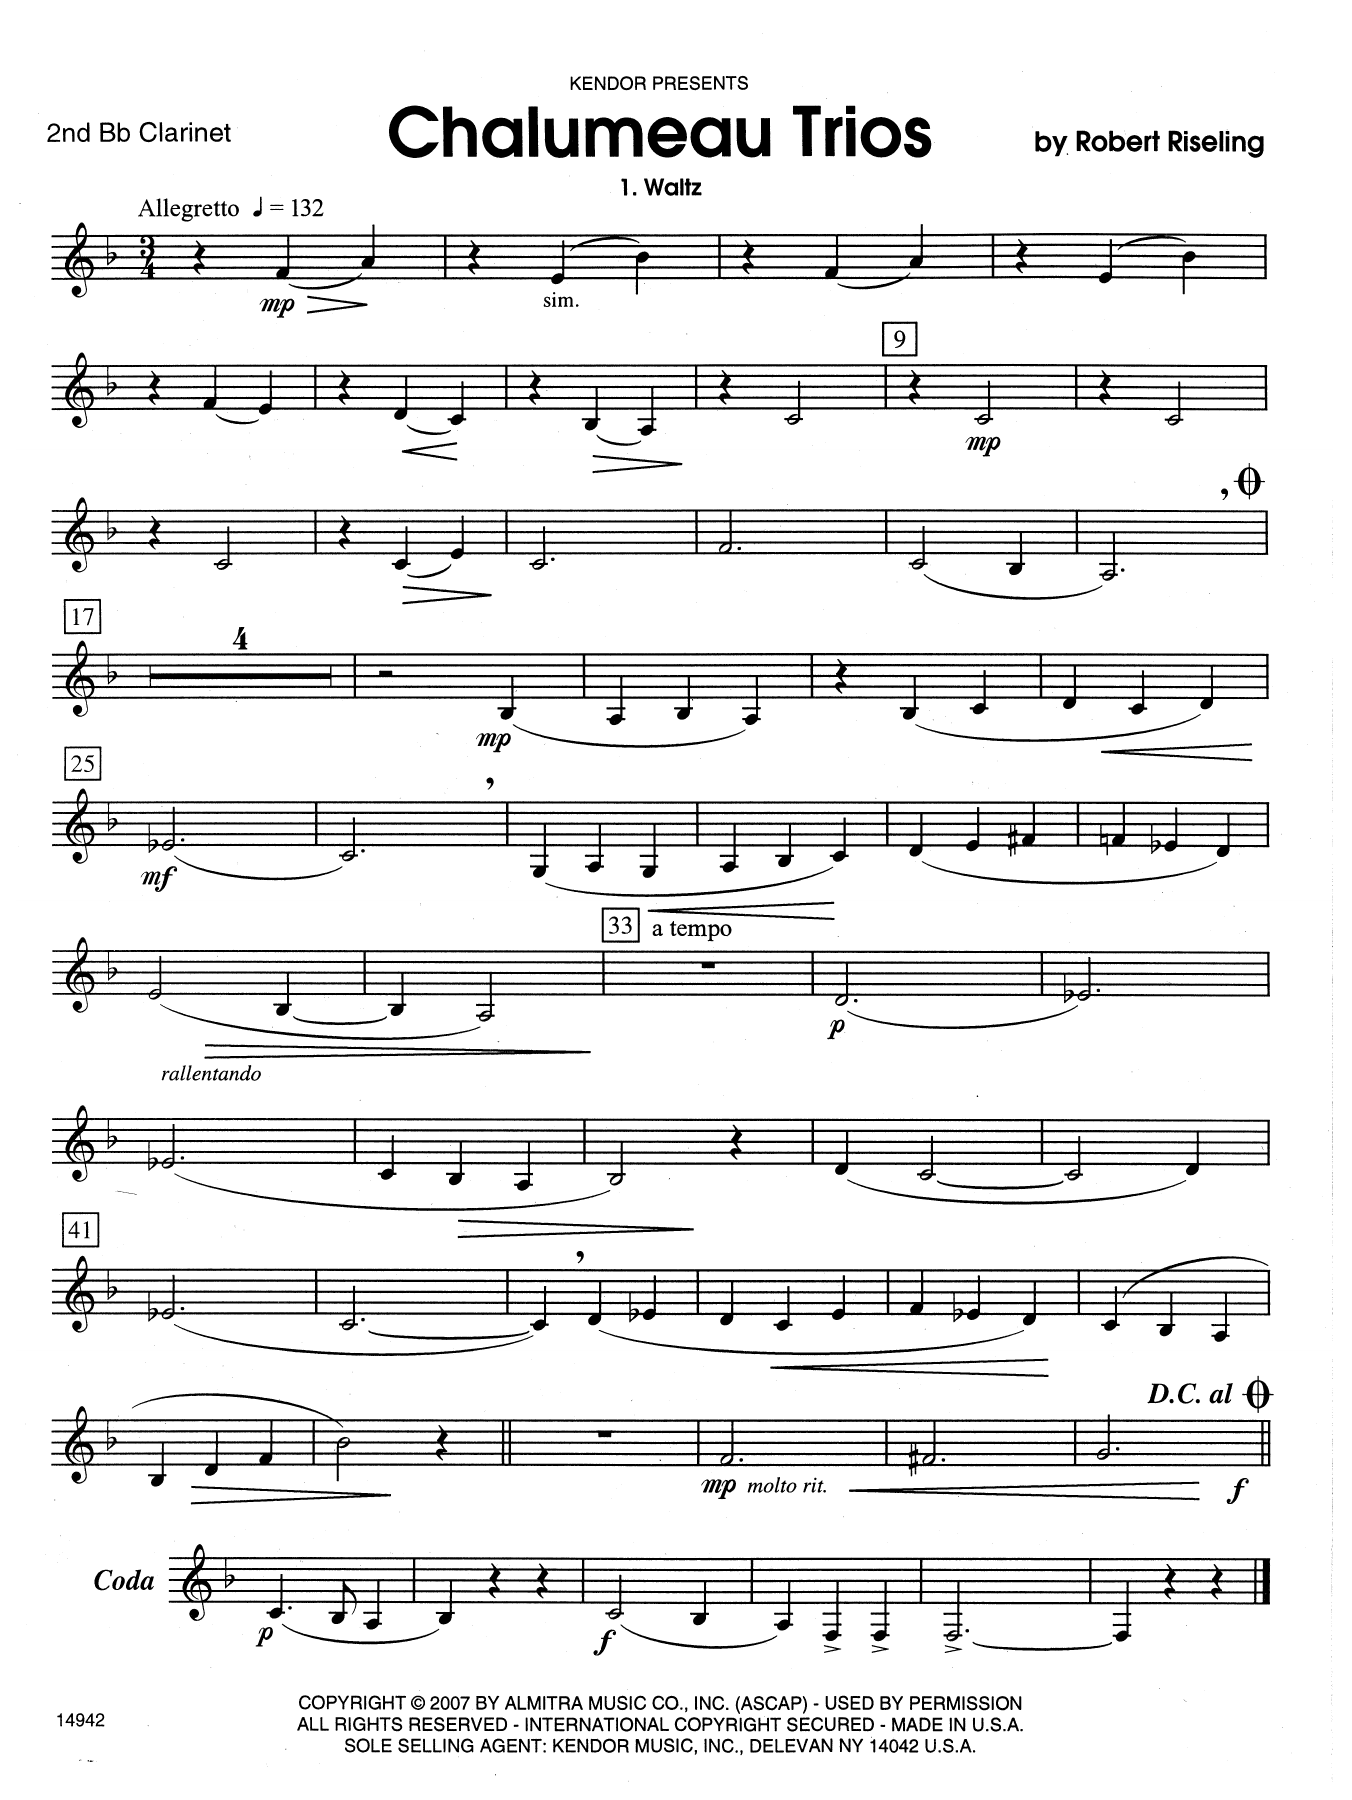 Riseling Chalumeau Trios - 2nd Bb Clarinet sheet music notes and chords. Download Printable PDF.